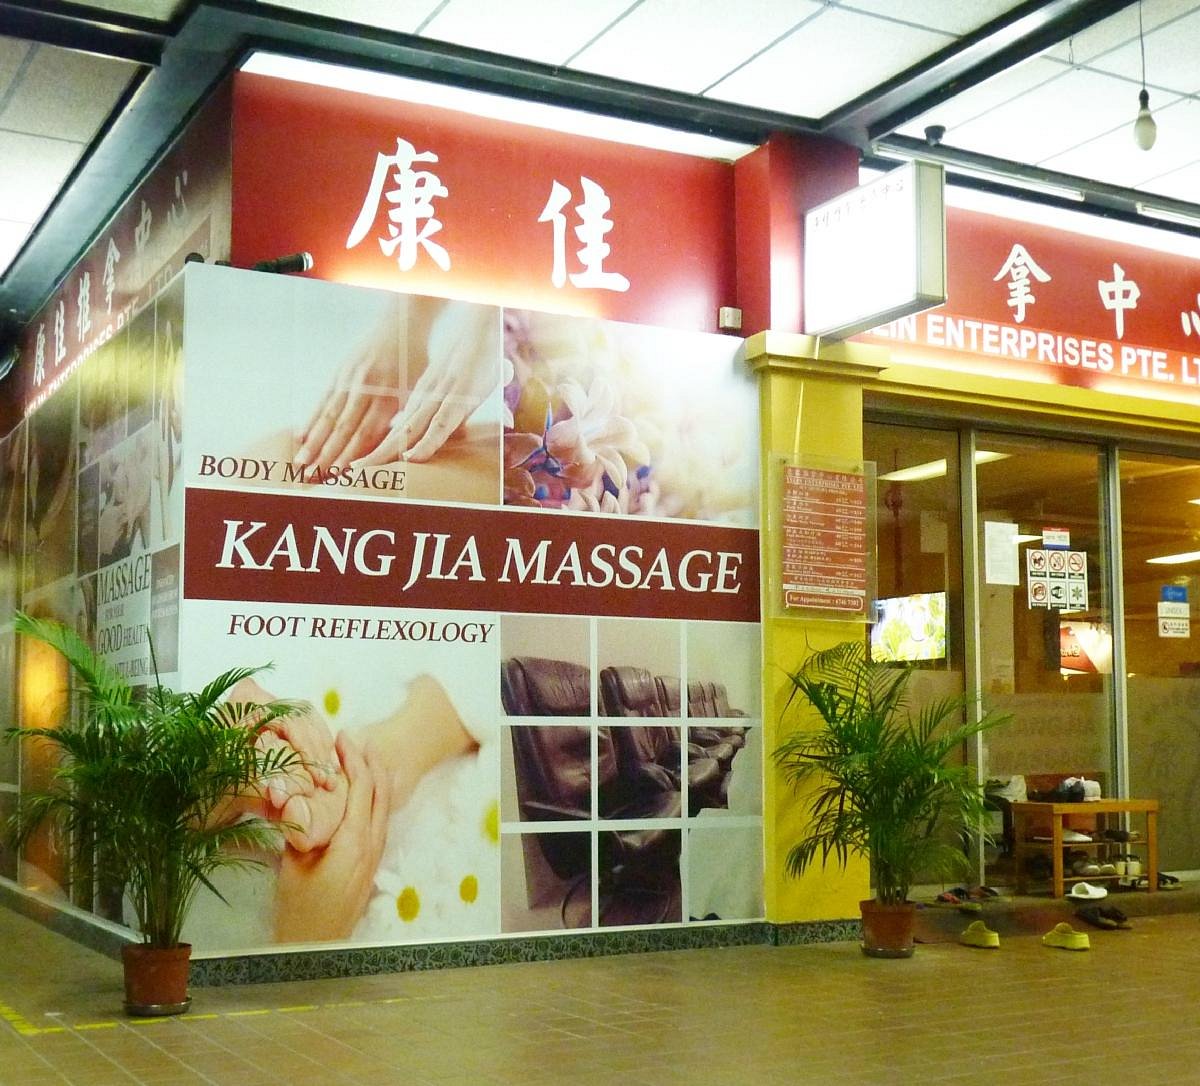 Kang Jia Massage Singapore All You Need To Know Before You Go